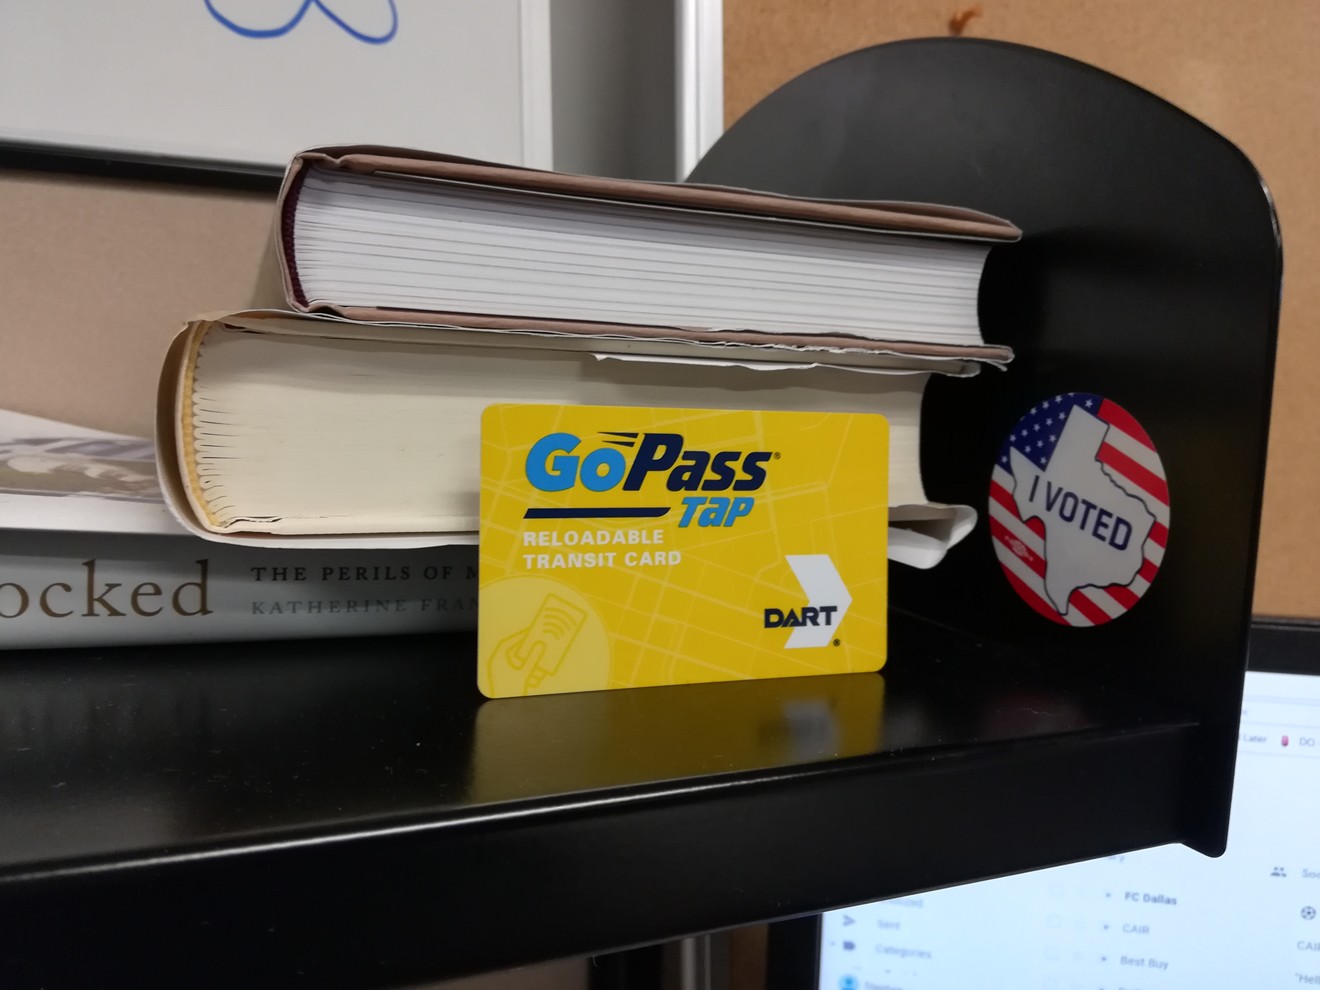 One of DART's new GoPass TAP contact-less payment cards.